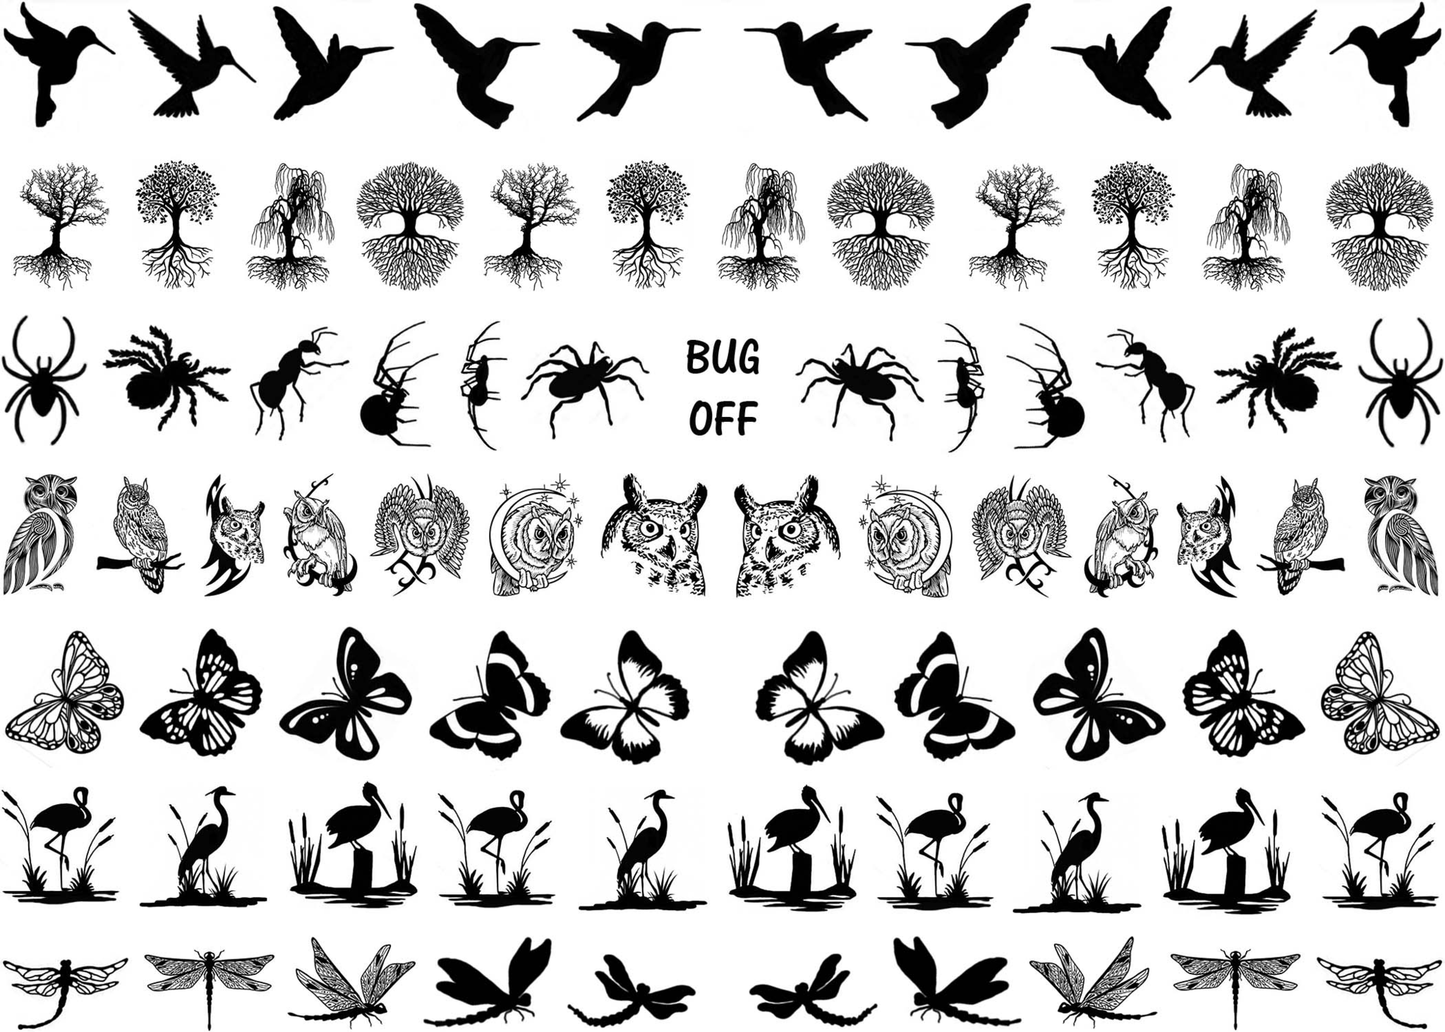 Hummingbird to Dragonfly 78 pcs 5/8" Black Fused Glass Decals